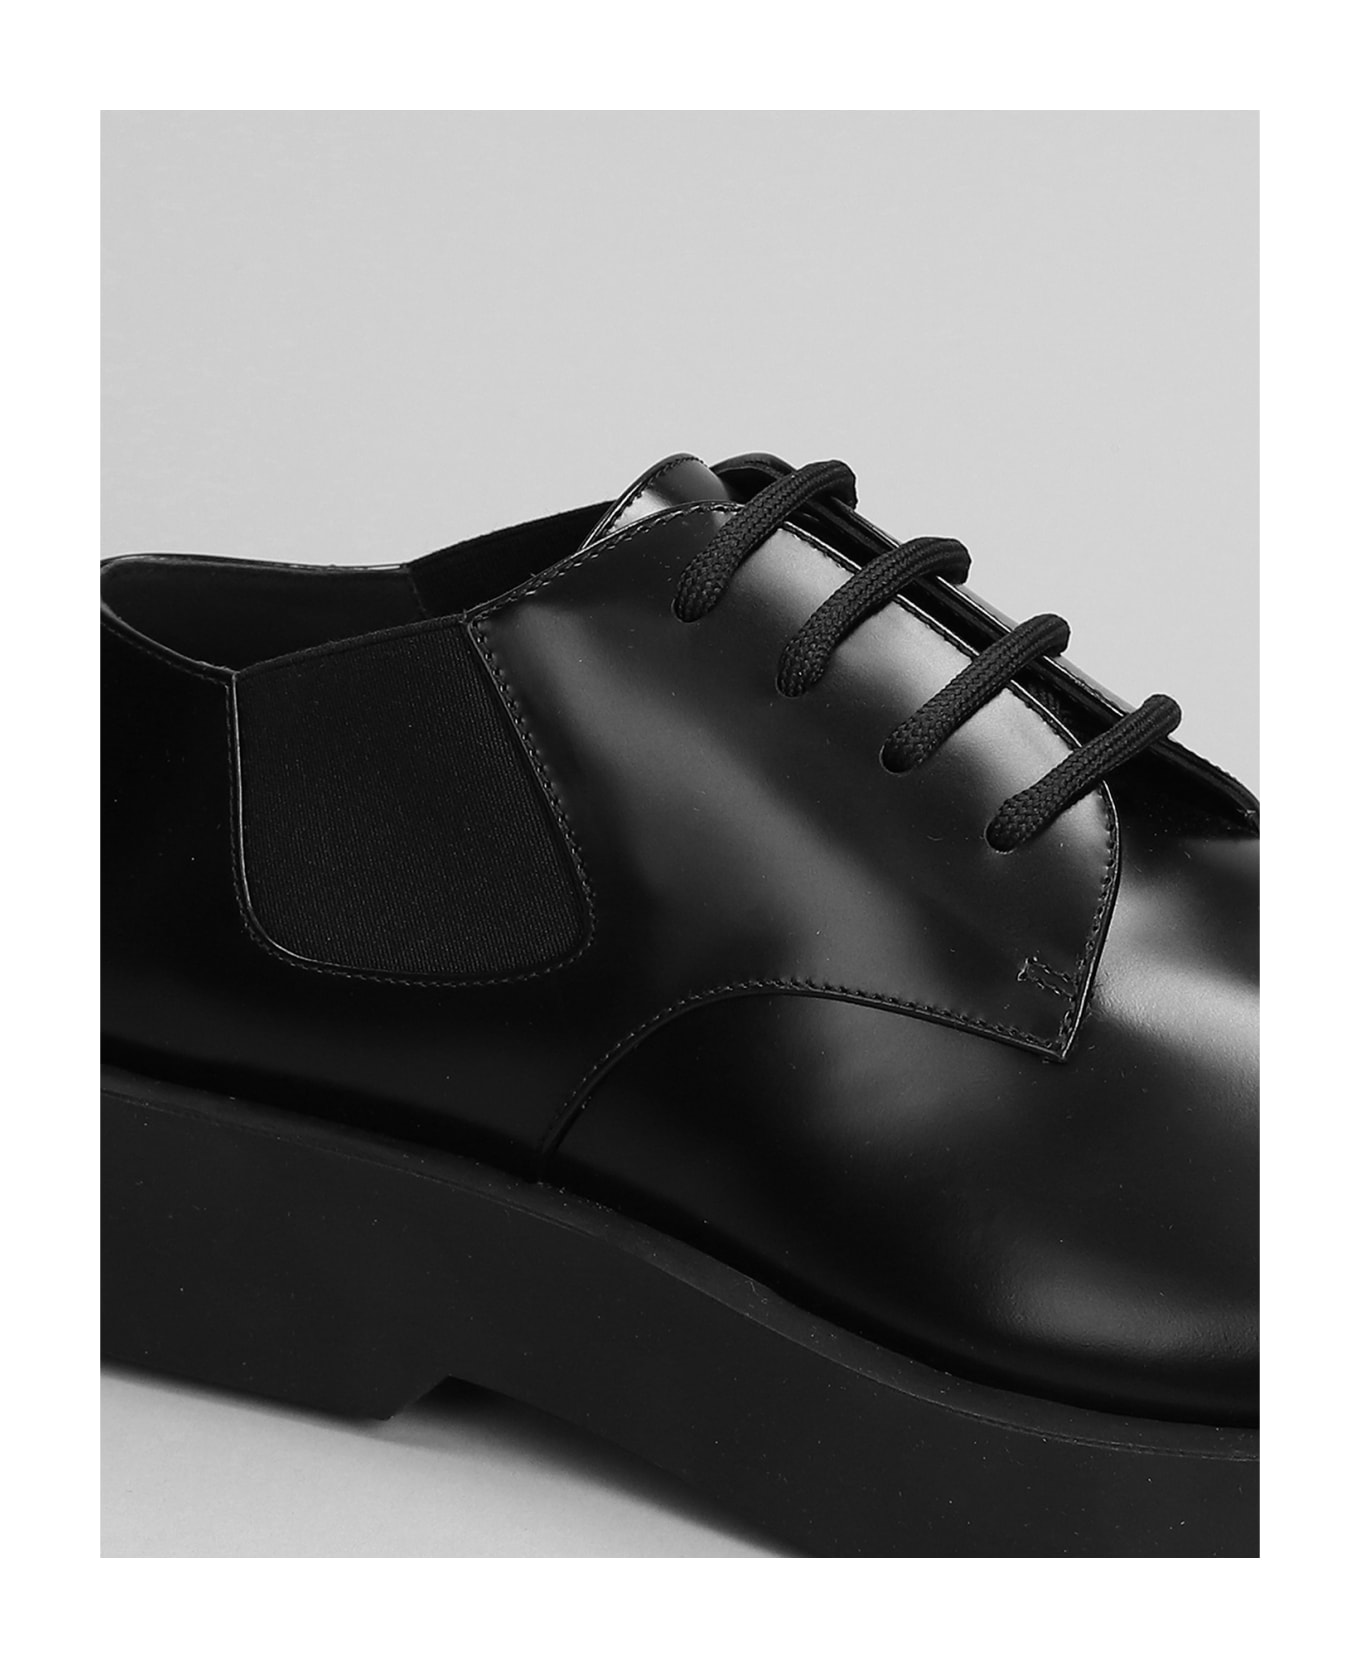 Jil Sander Lace Up Shoes In Black Leather - black レースアップシューズ